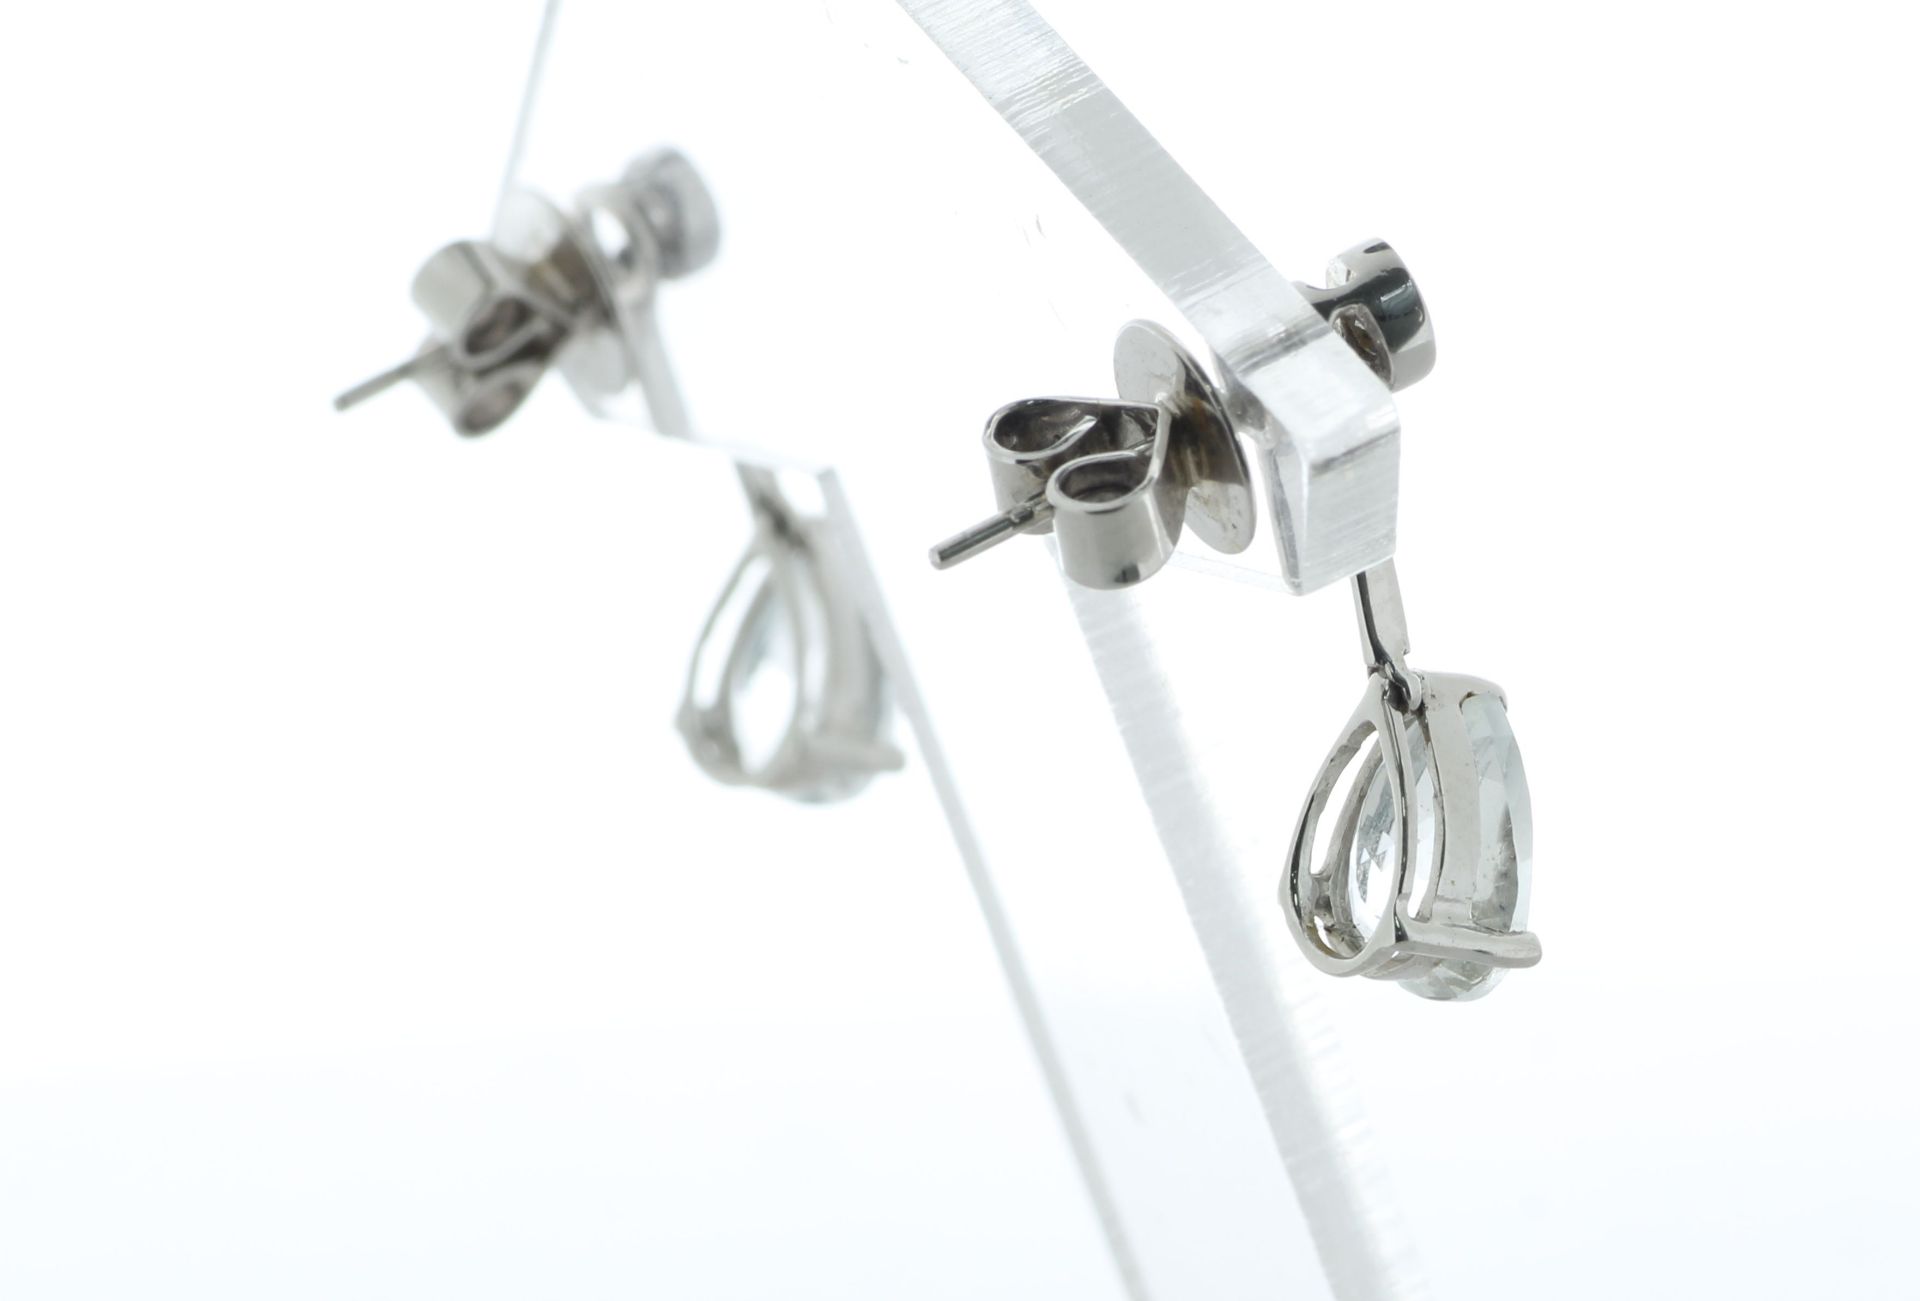 18ct White Gold Diamond And Aqua Marine Drop Earrings (AM1.36) 0.16 Carats - Valued By AGI £3,250.00 - Image 3 of 6